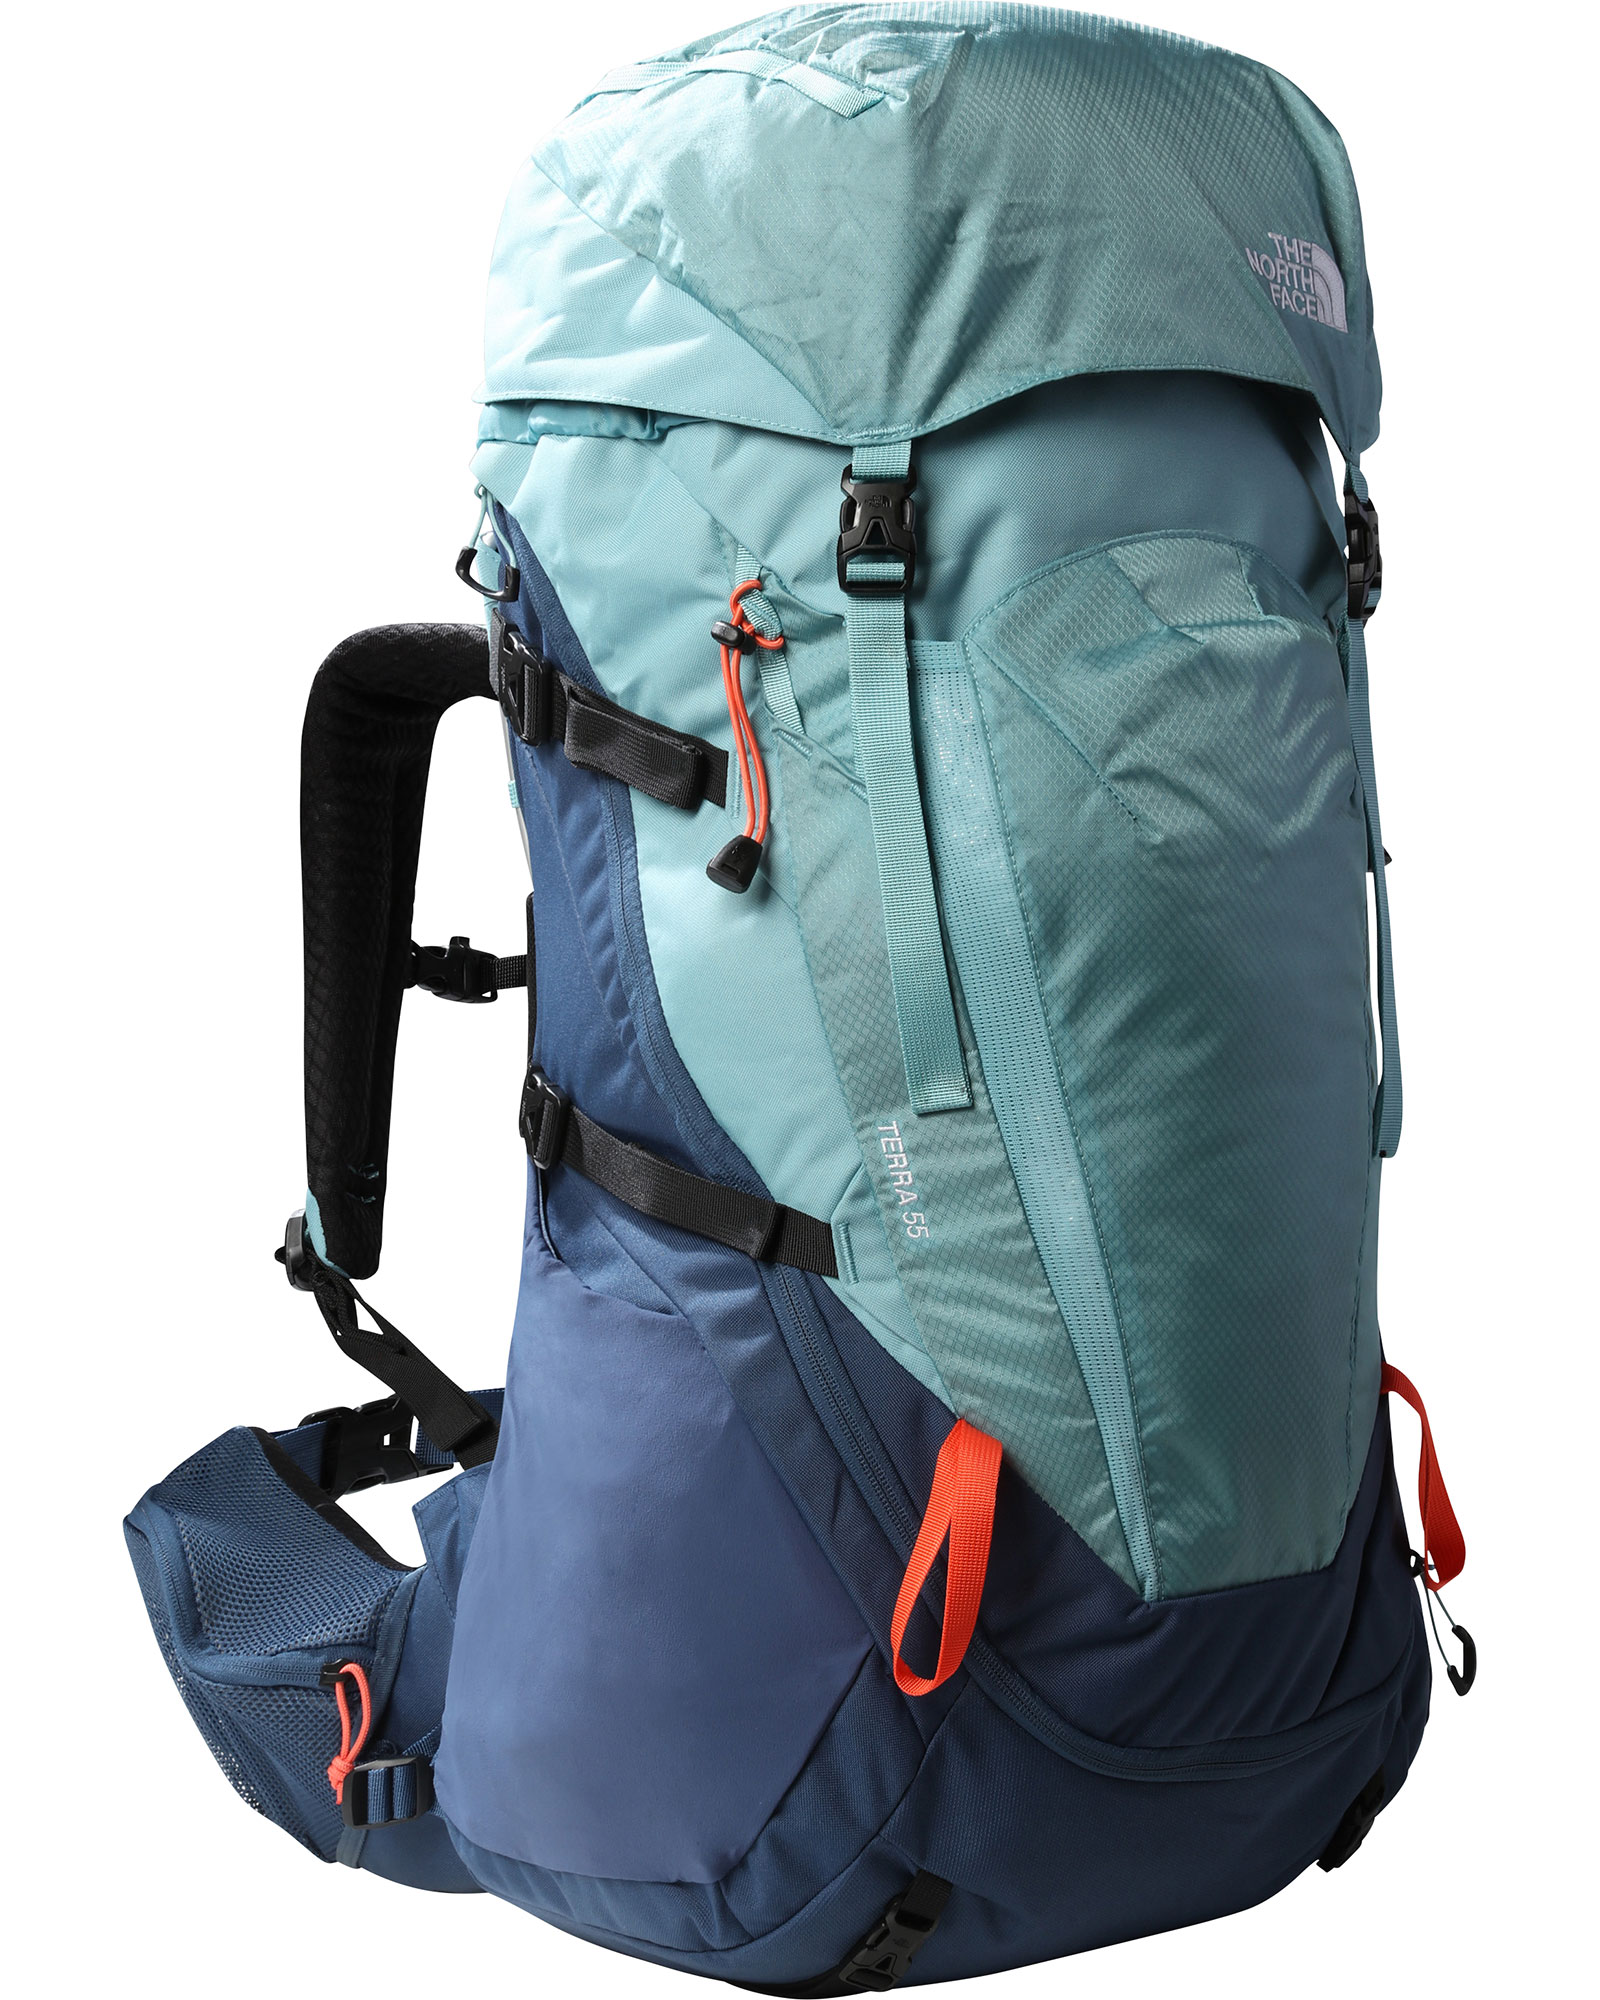 The North Face Terra 55 Women’s Backpack - Reef Waters/Shady Blue/Retro Orange M/L